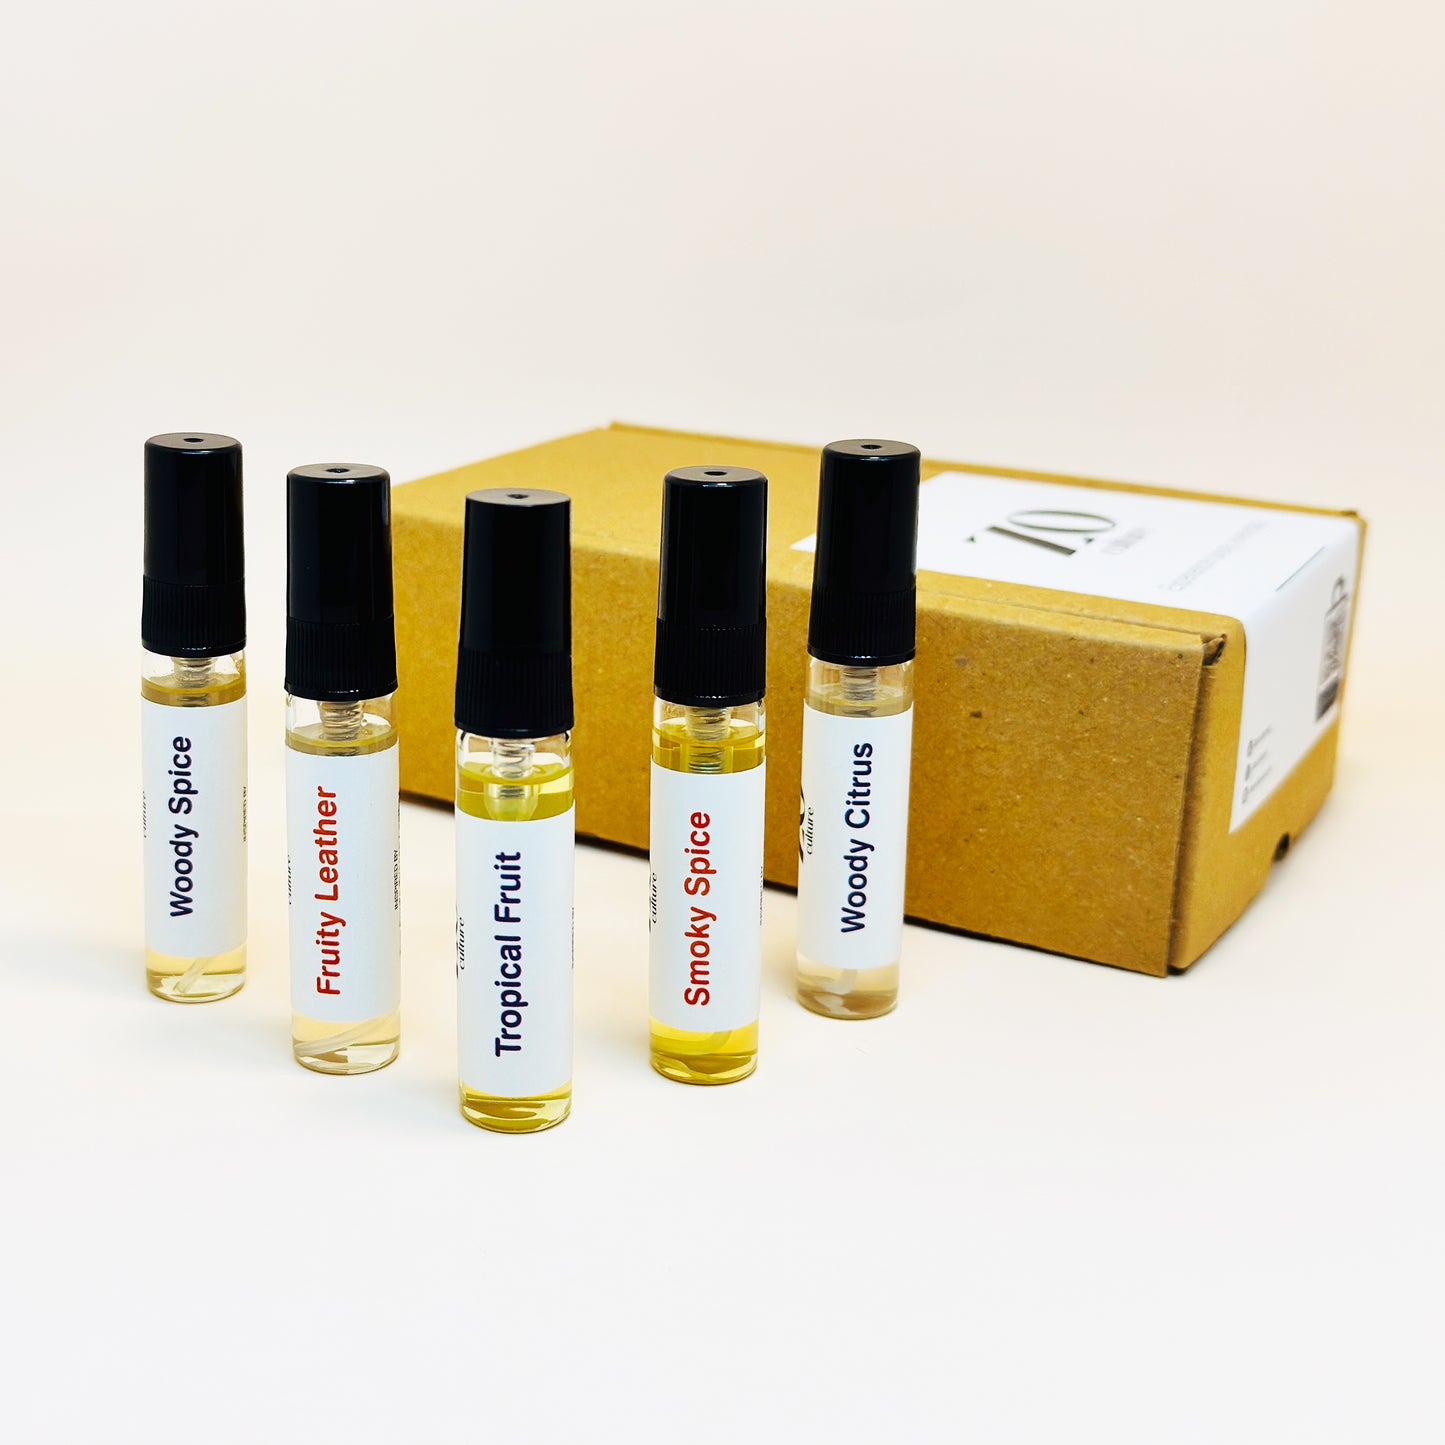 Testers Signature Men Scent Sampler Collection 1 ZoCulture